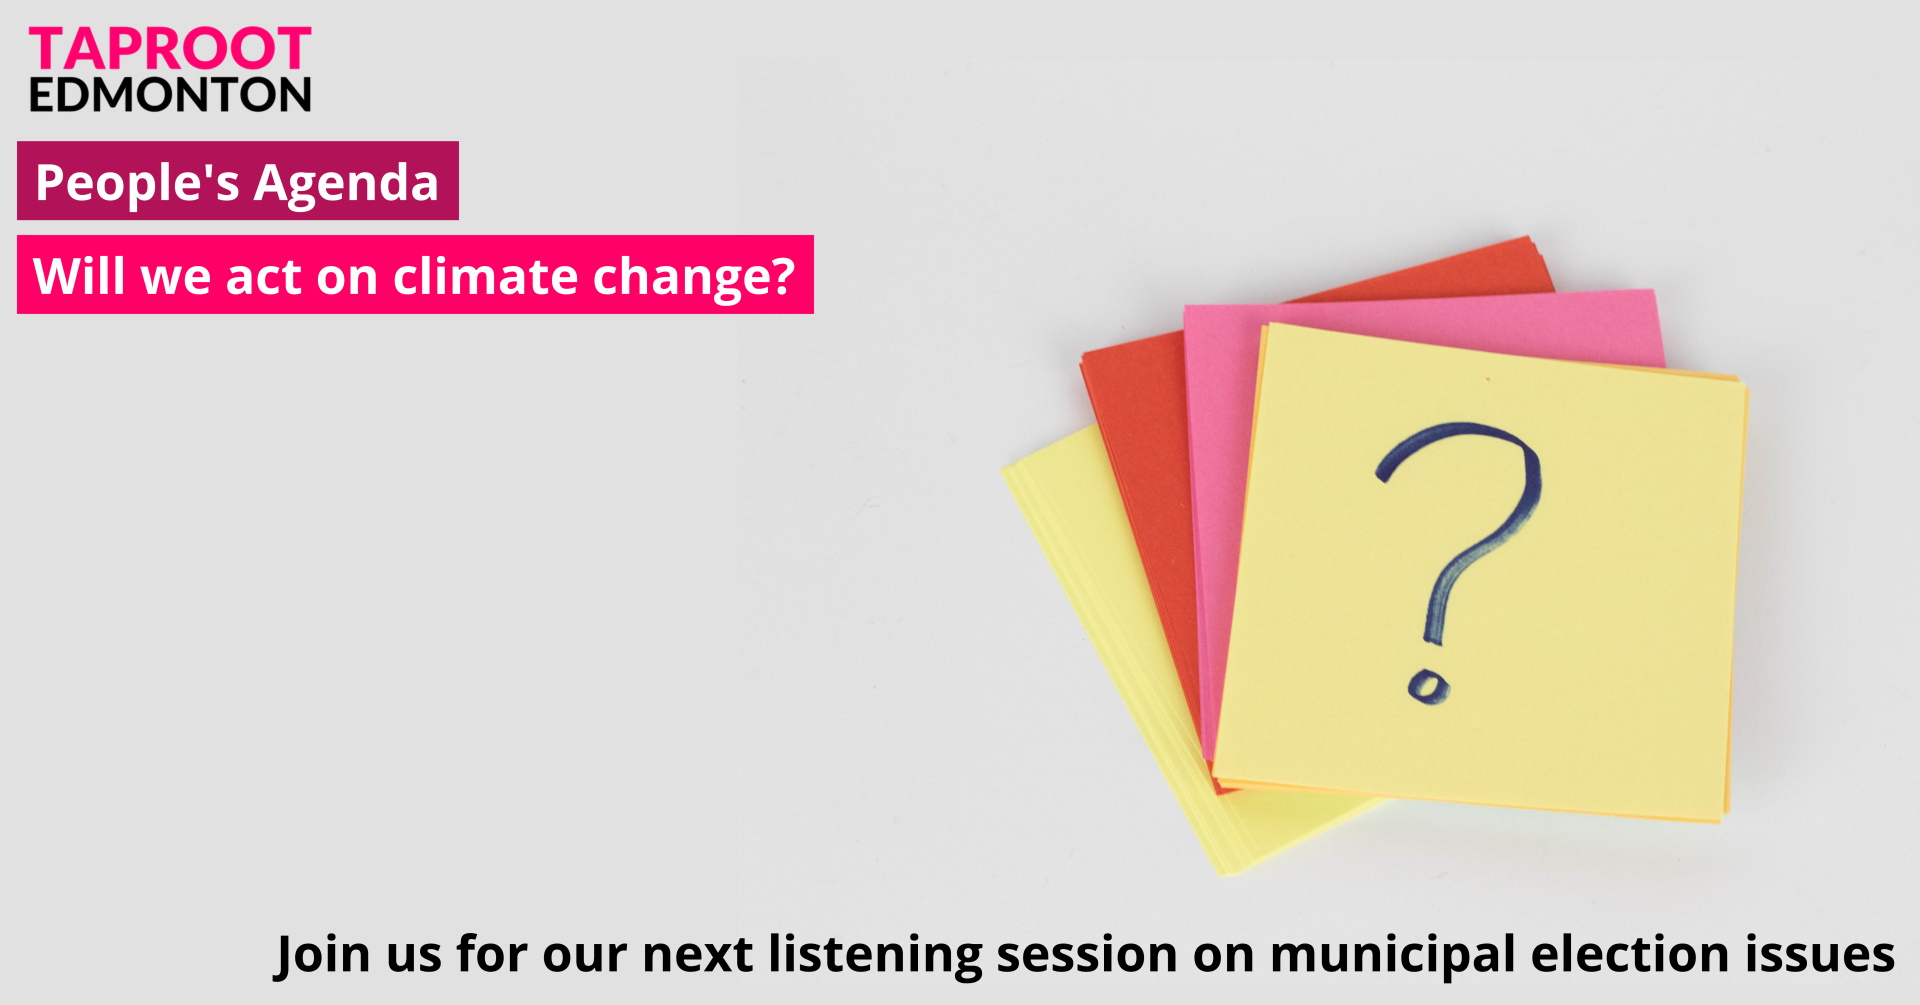 Promotional image for People's Agenda listening session on climate change